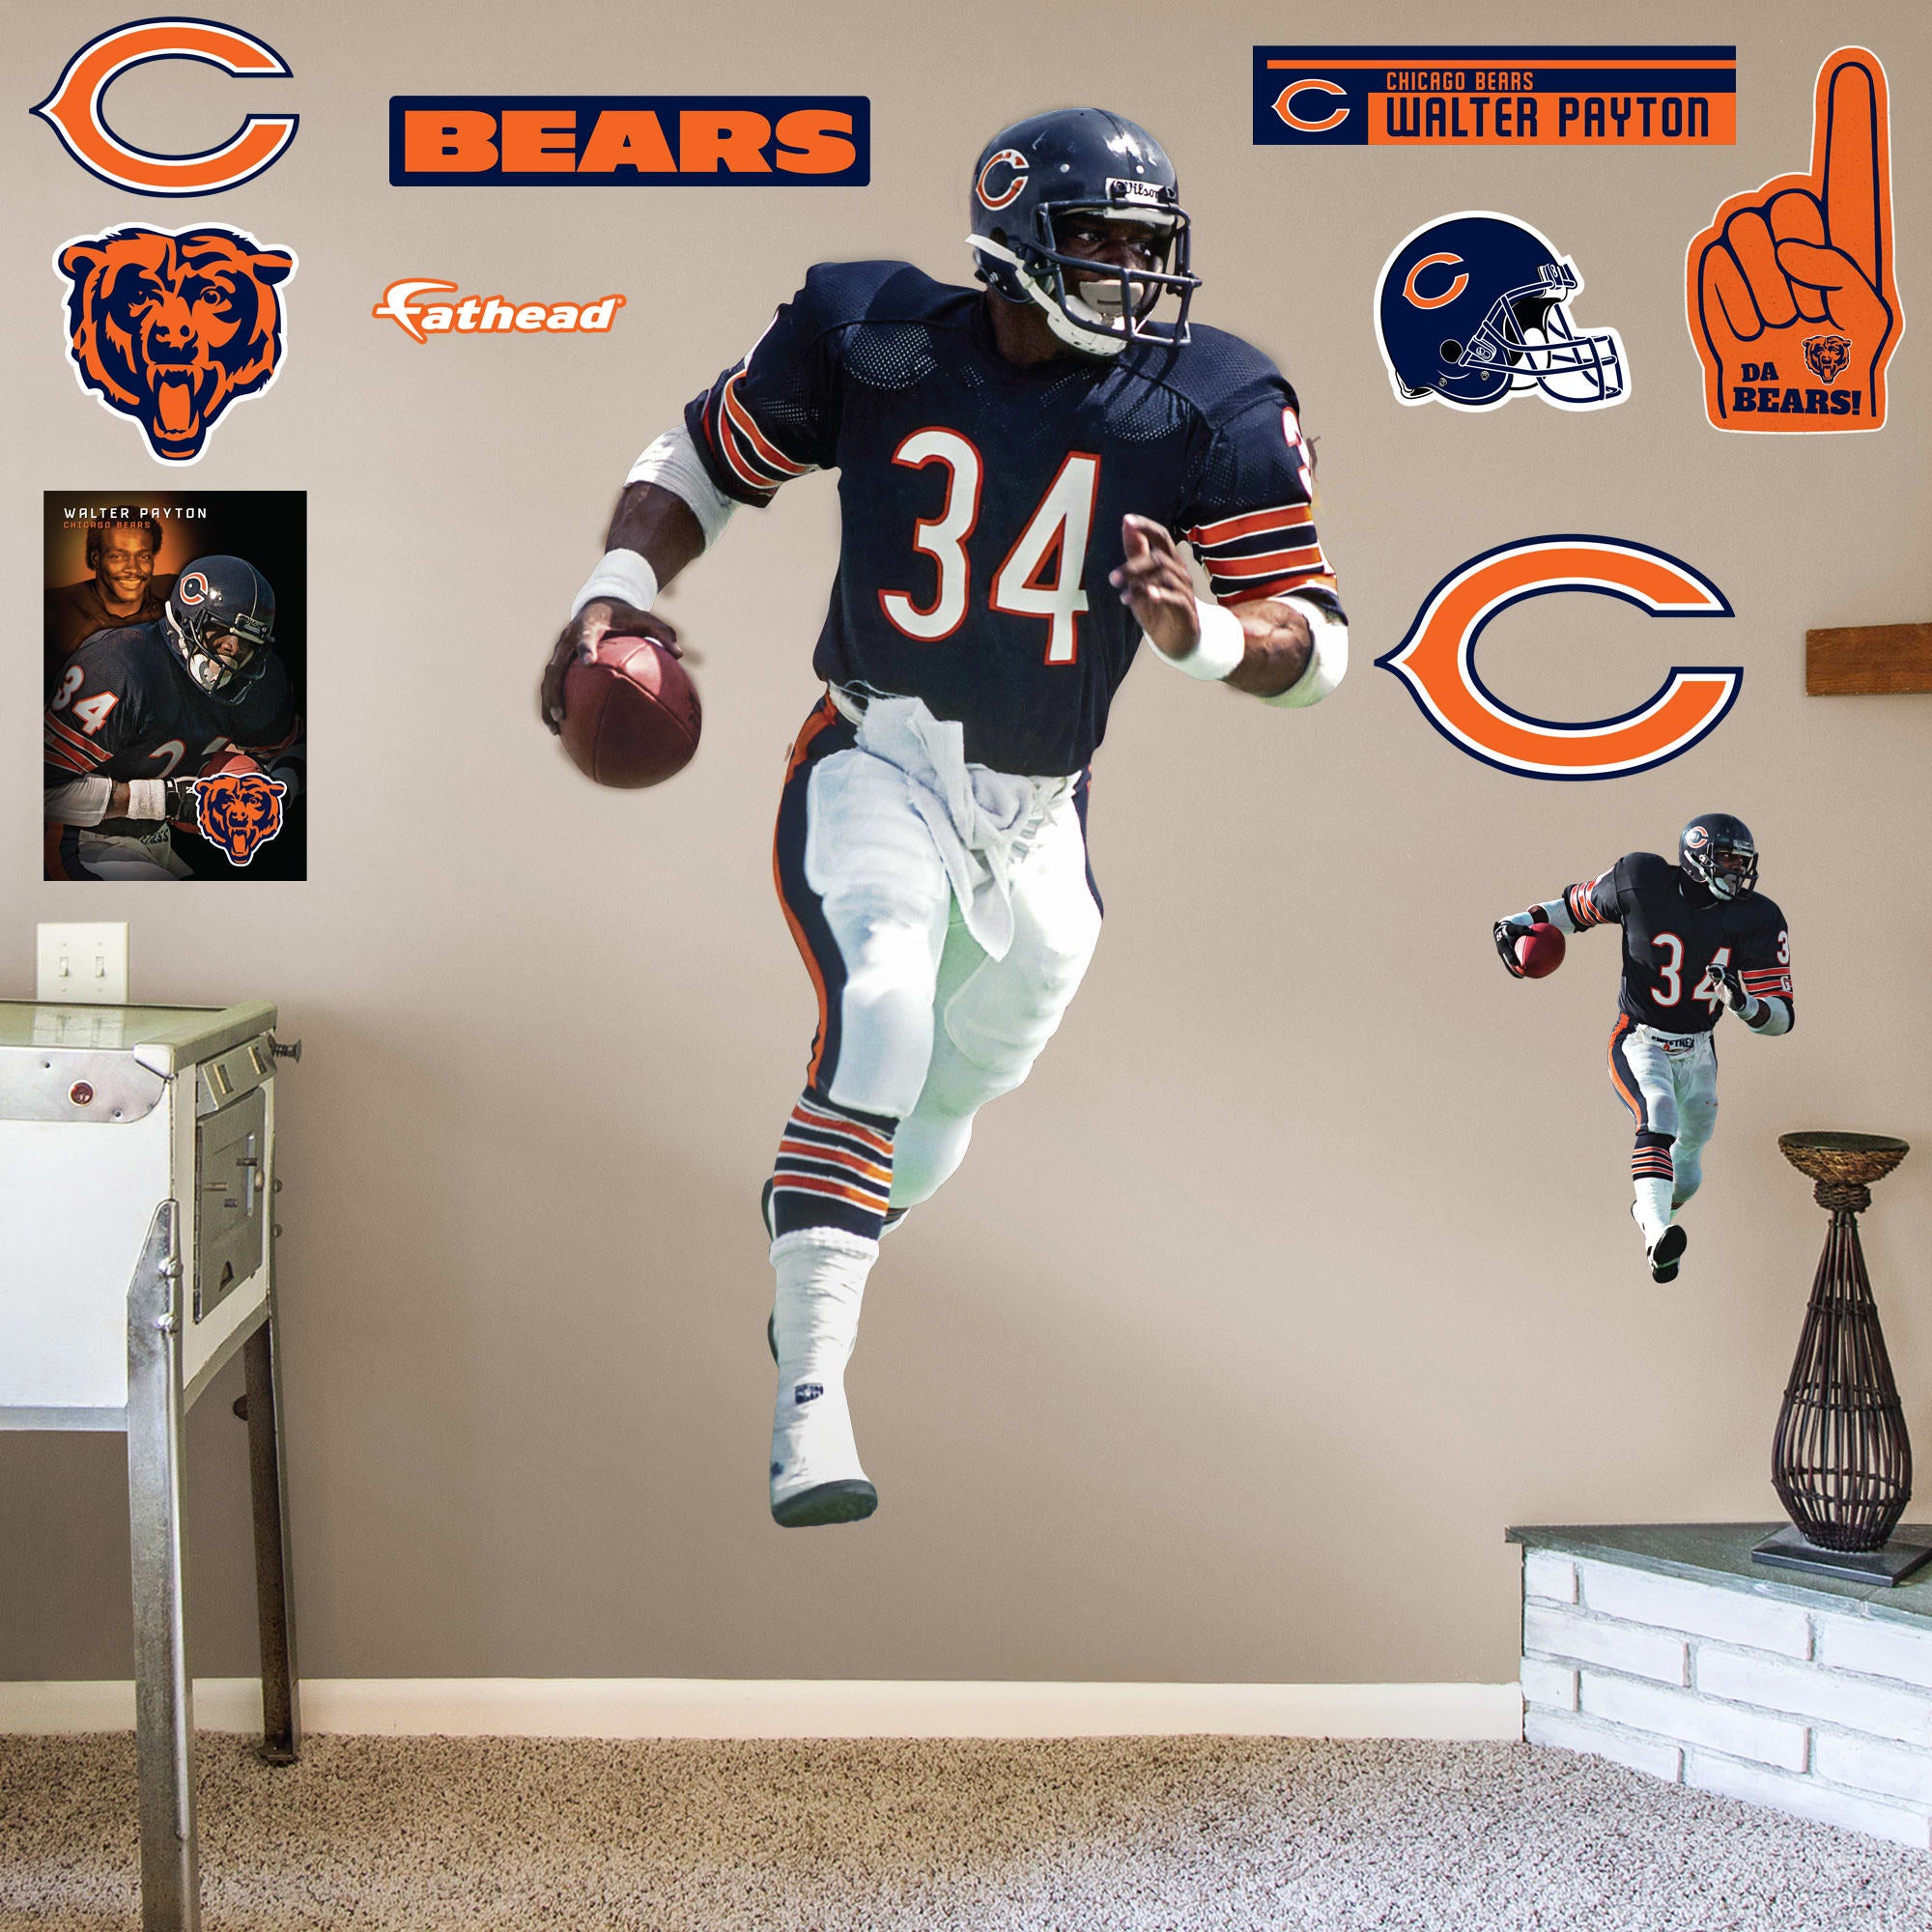 Walter Payton for Chicago Bears: Legend - Officially Licensed NFL Removable Wall Decal Life-Size Athlete + 9 Decals (44"W x 77"H